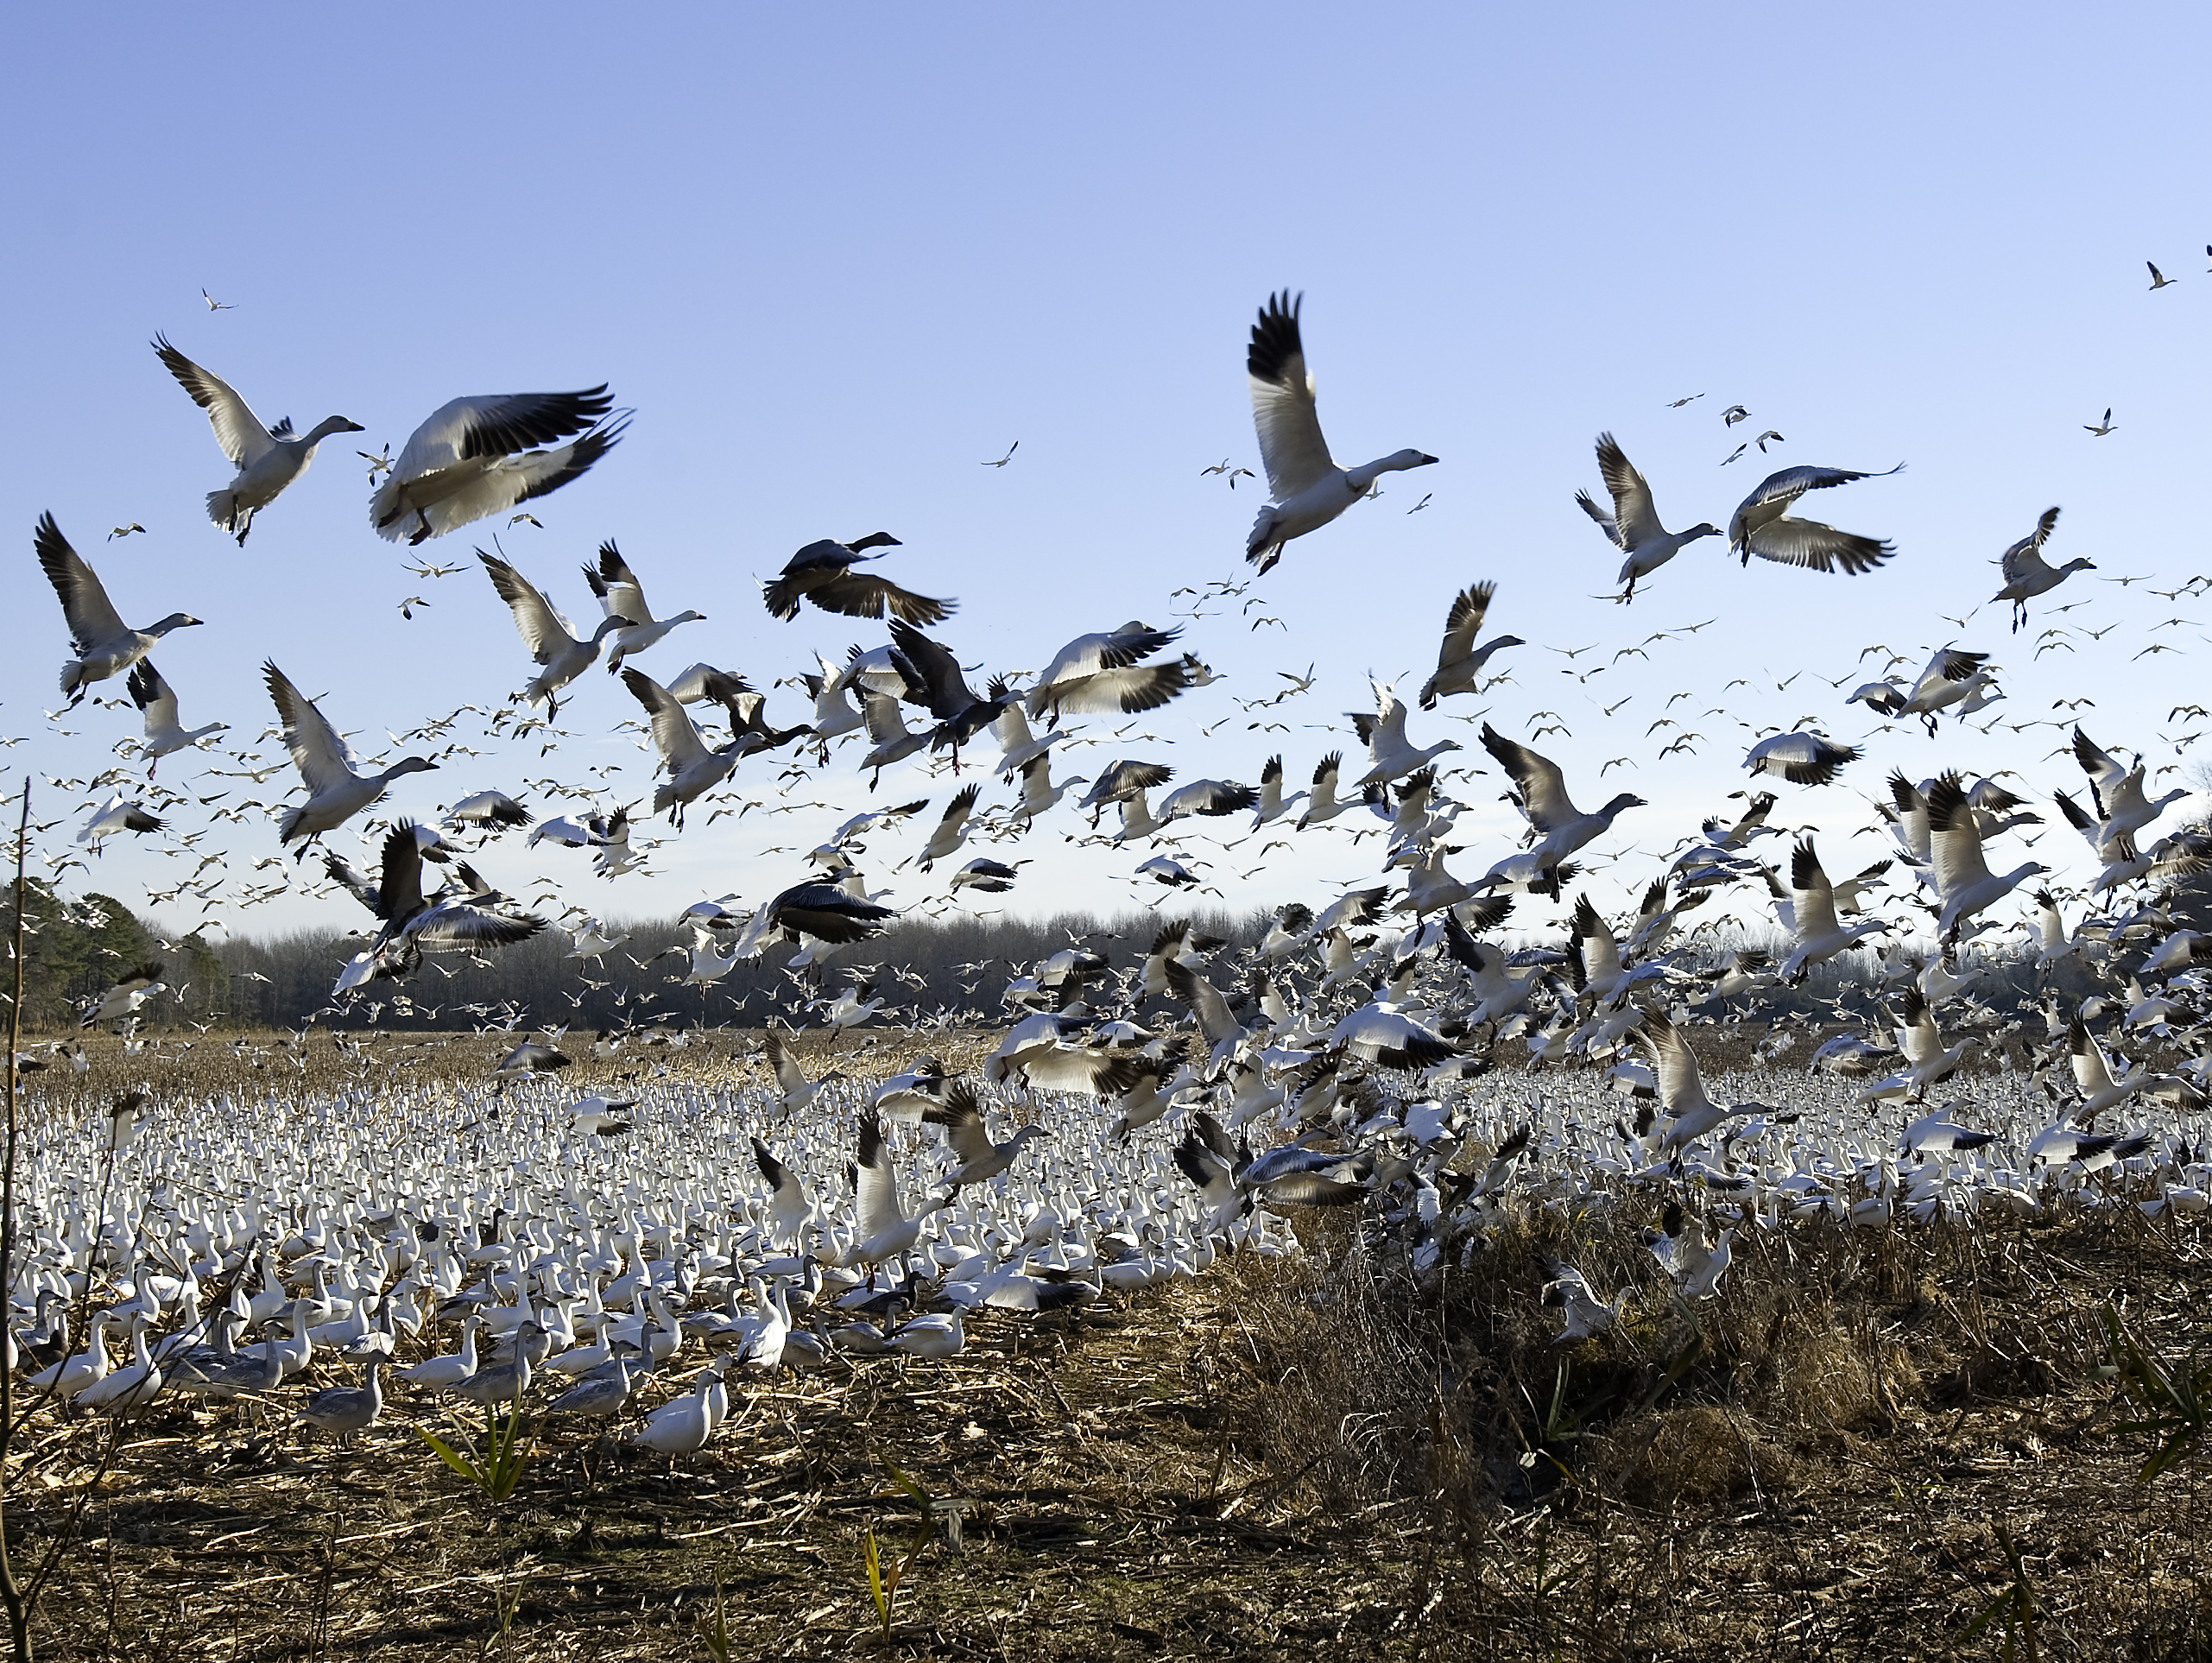 A flock of hundreds of snow geese begins to take off from an agricultural field